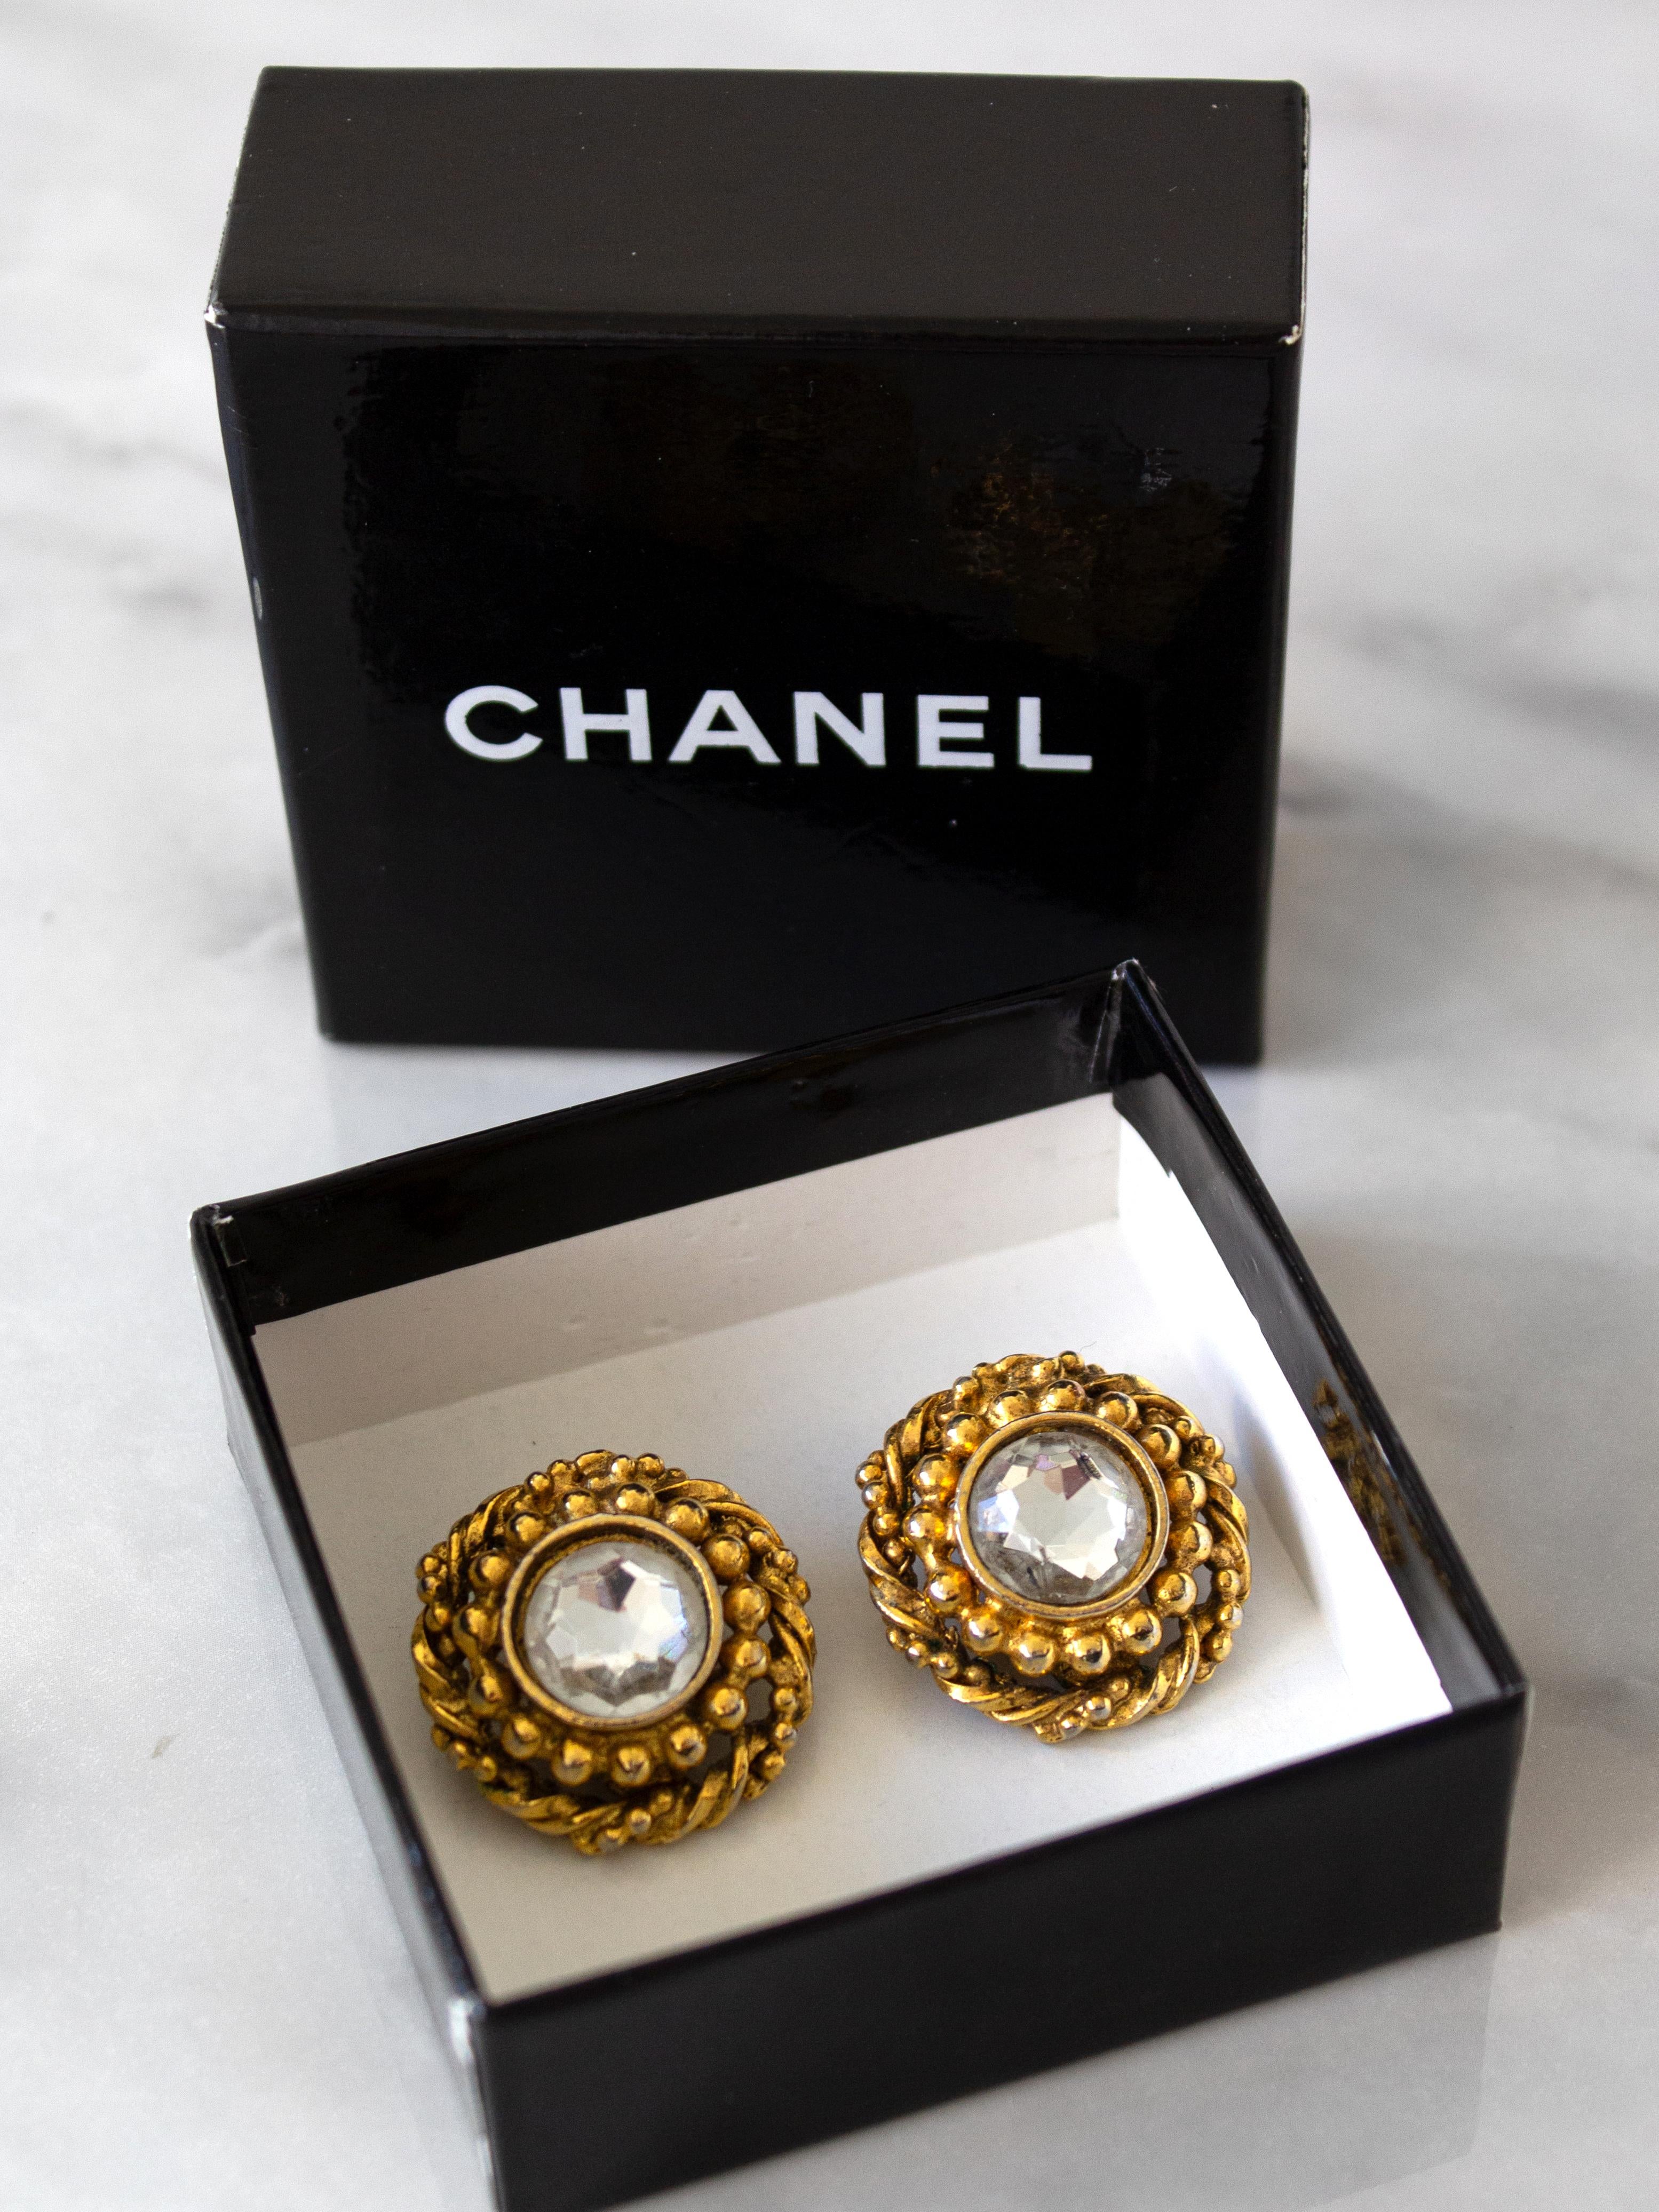 These vintage Chanel clip-on earrings from the 1970s are timeless and elegant. Each earring has a sparkling rhinestone center, surrounded by classic dots and a twisted rope design. The gold-plated setting adds a touch of sophistication, and the